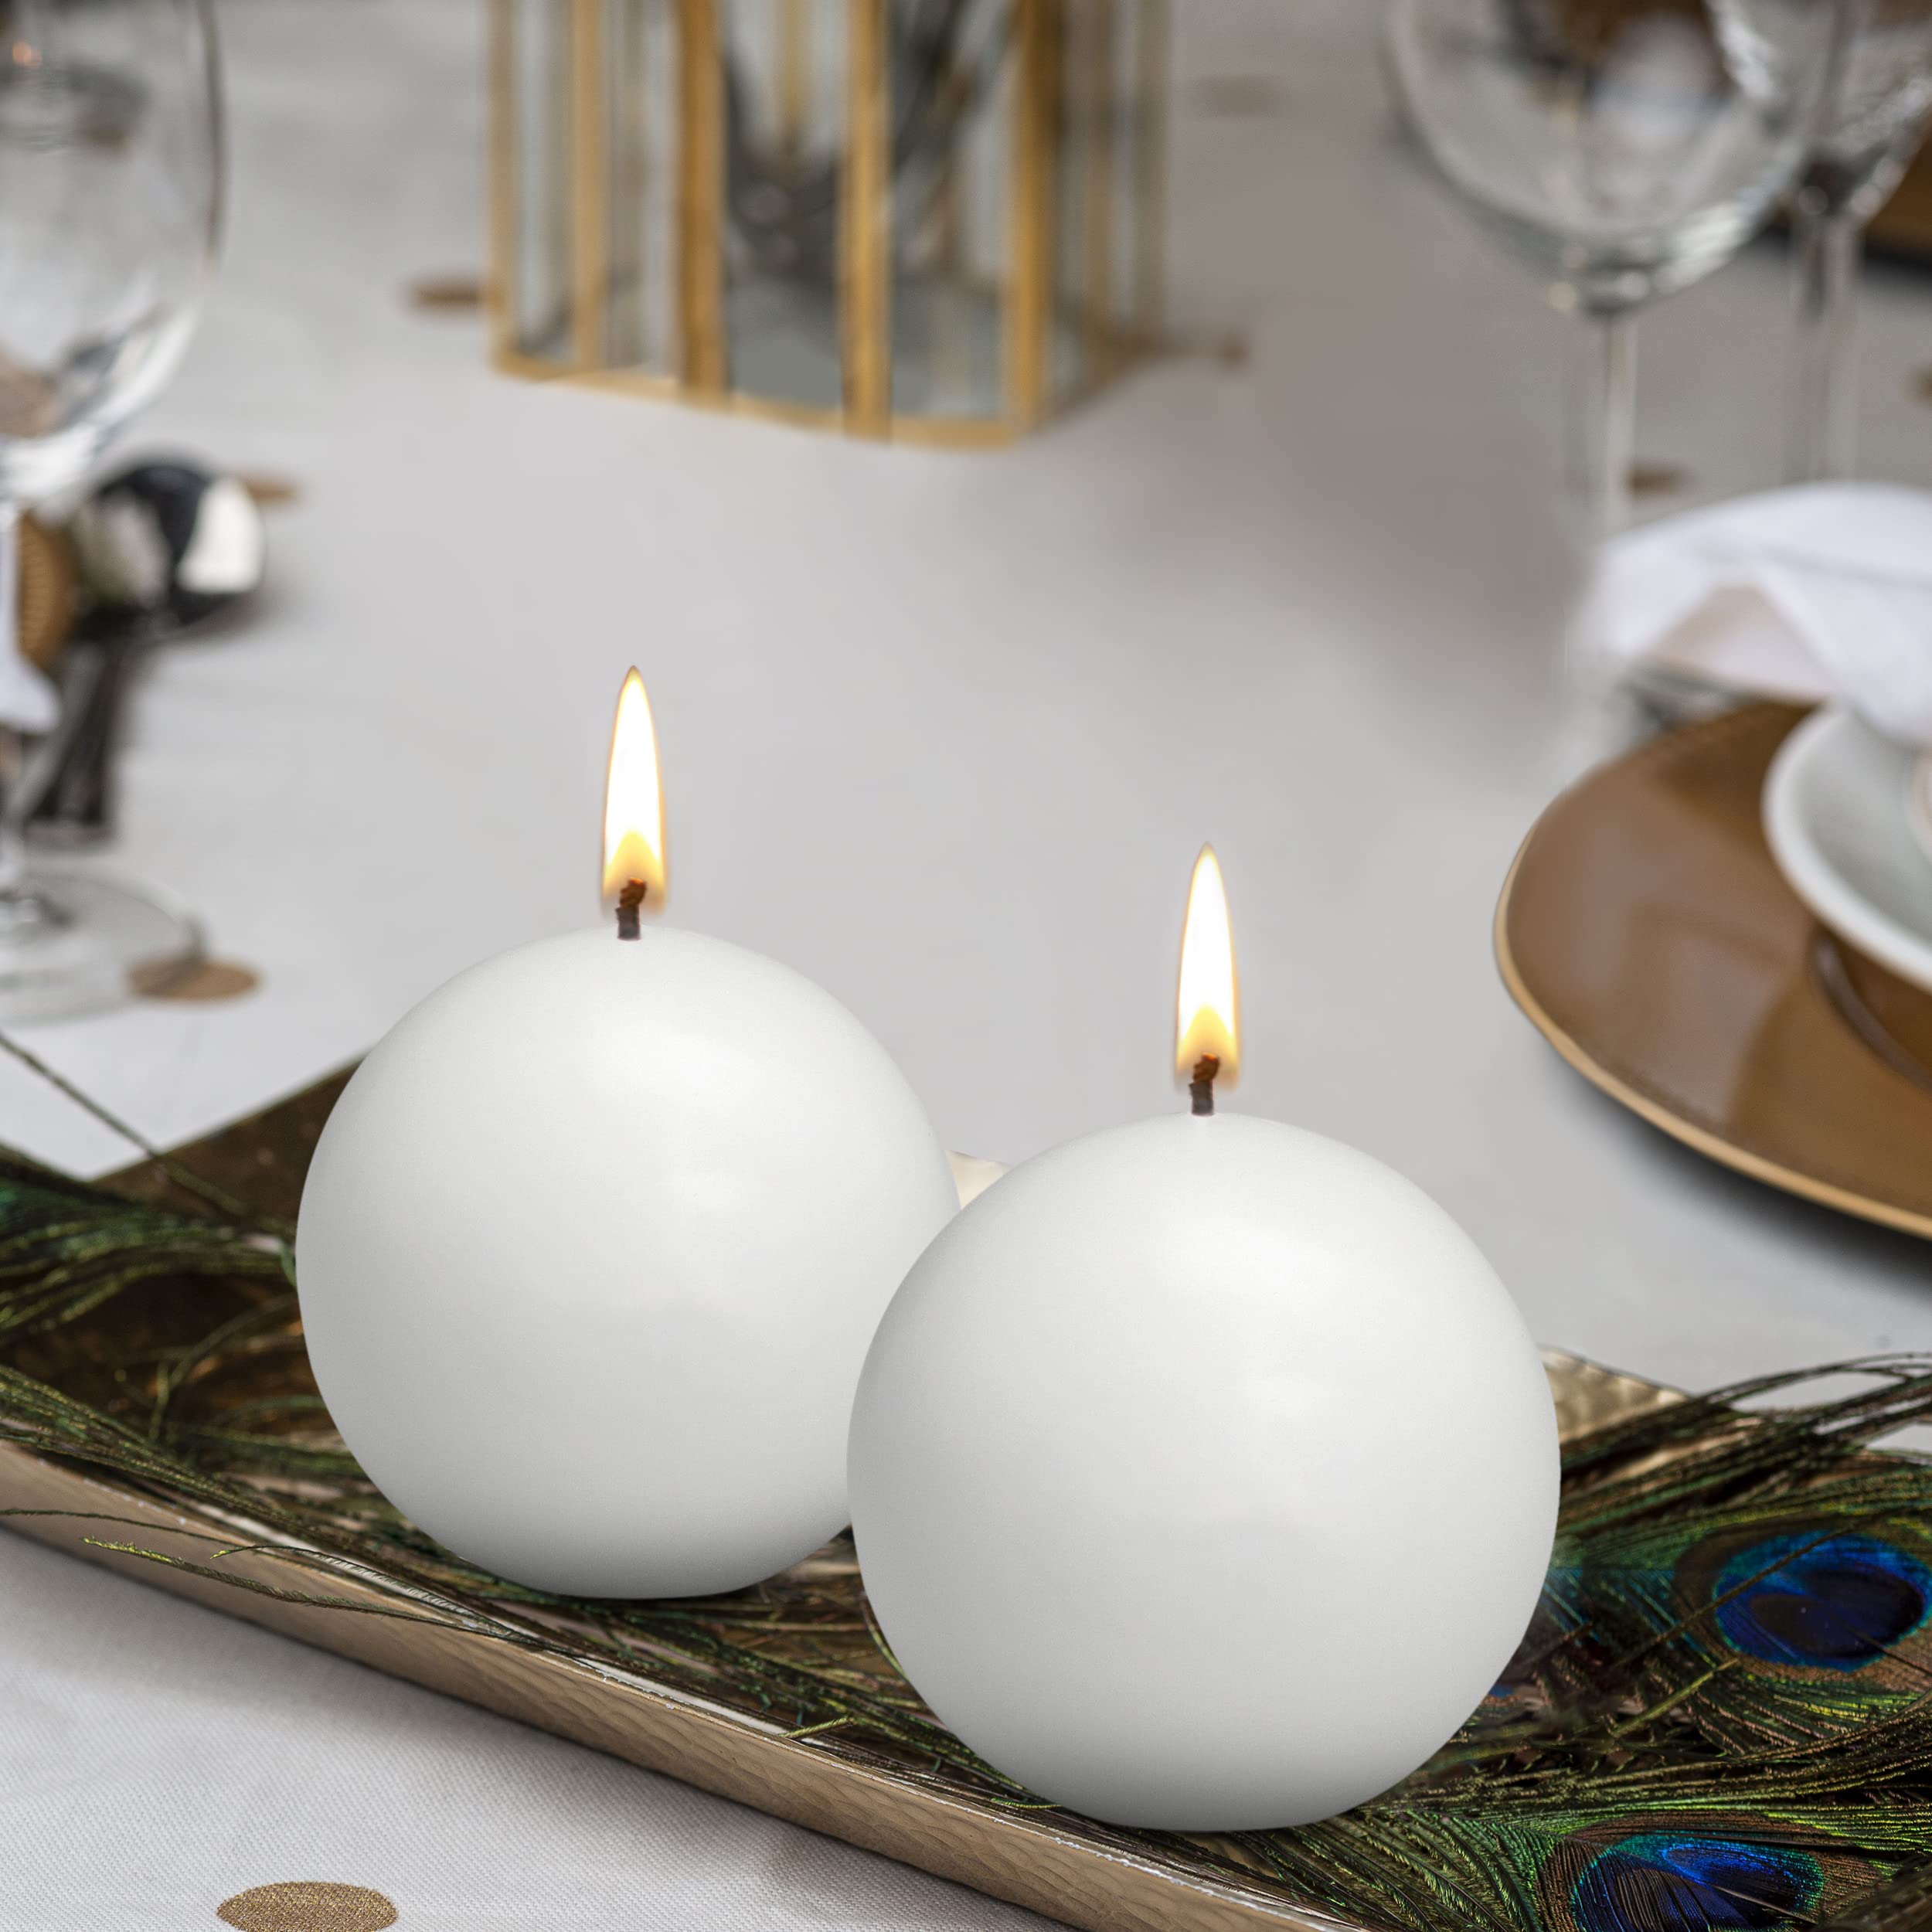 BOLSIUS Tray of Ball Candles - 16 Long Burning Hours Candle Set - 2.75 inch Dripless Candle - Perfect for Wedding Candles, Parties and Special Occasions  - Like New